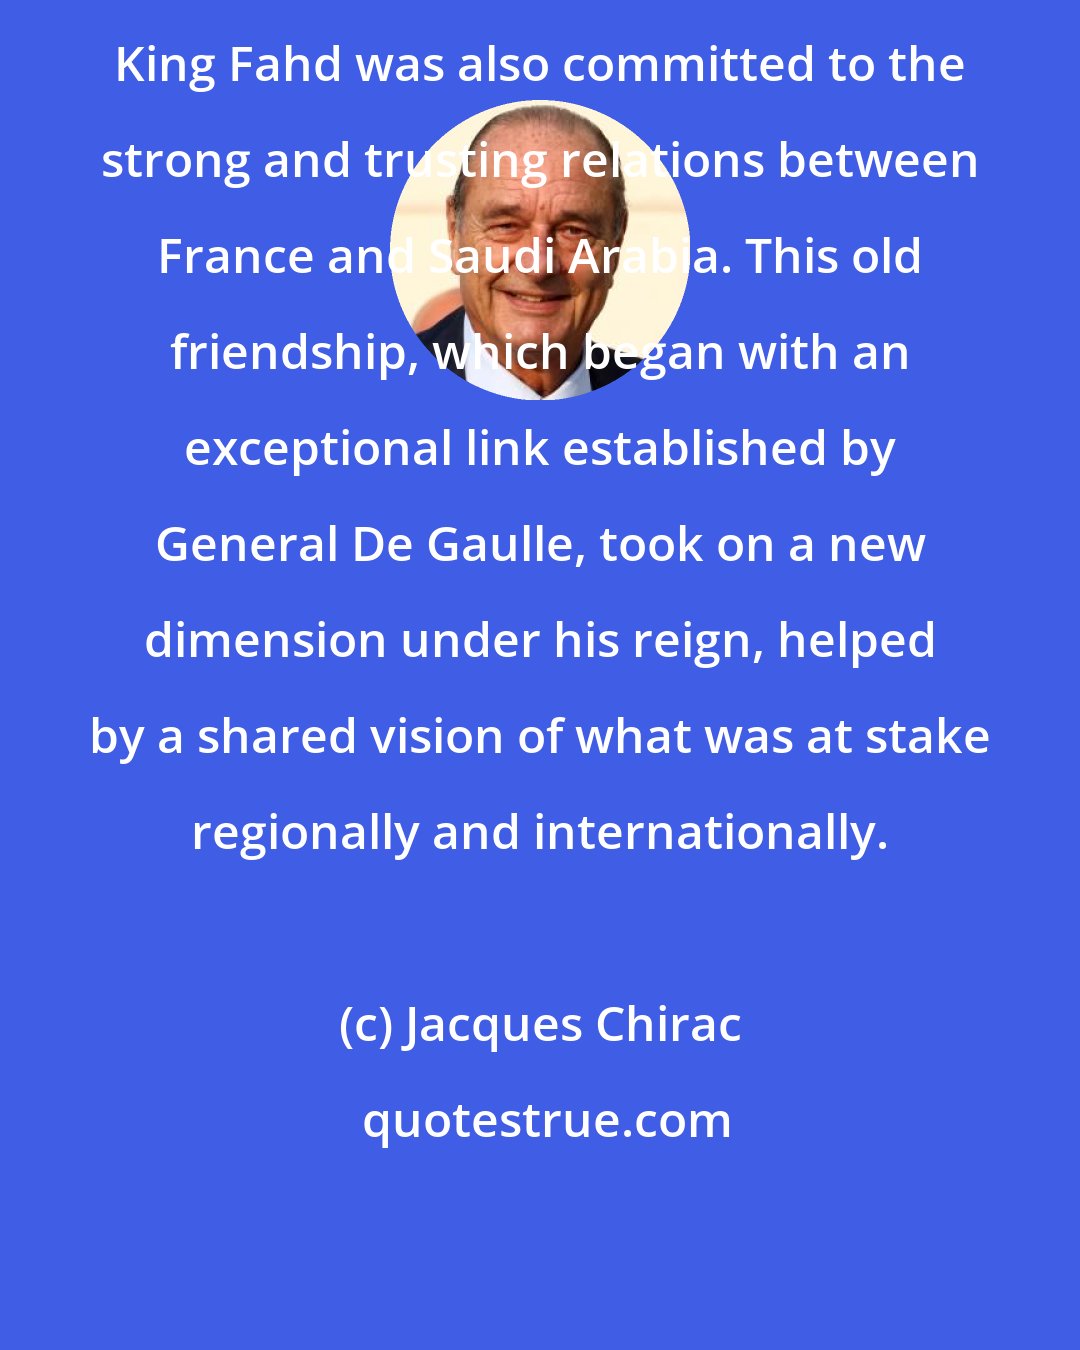 Jacques Chirac: King Fahd was also committed to the strong and trusting relations between France and Saudi Arabia. This old friendship, which began with an exceptional link established by General De Gaulle, took on a new dimension under his reign, helped by a shared vision of what was at stake regionally and internationally.